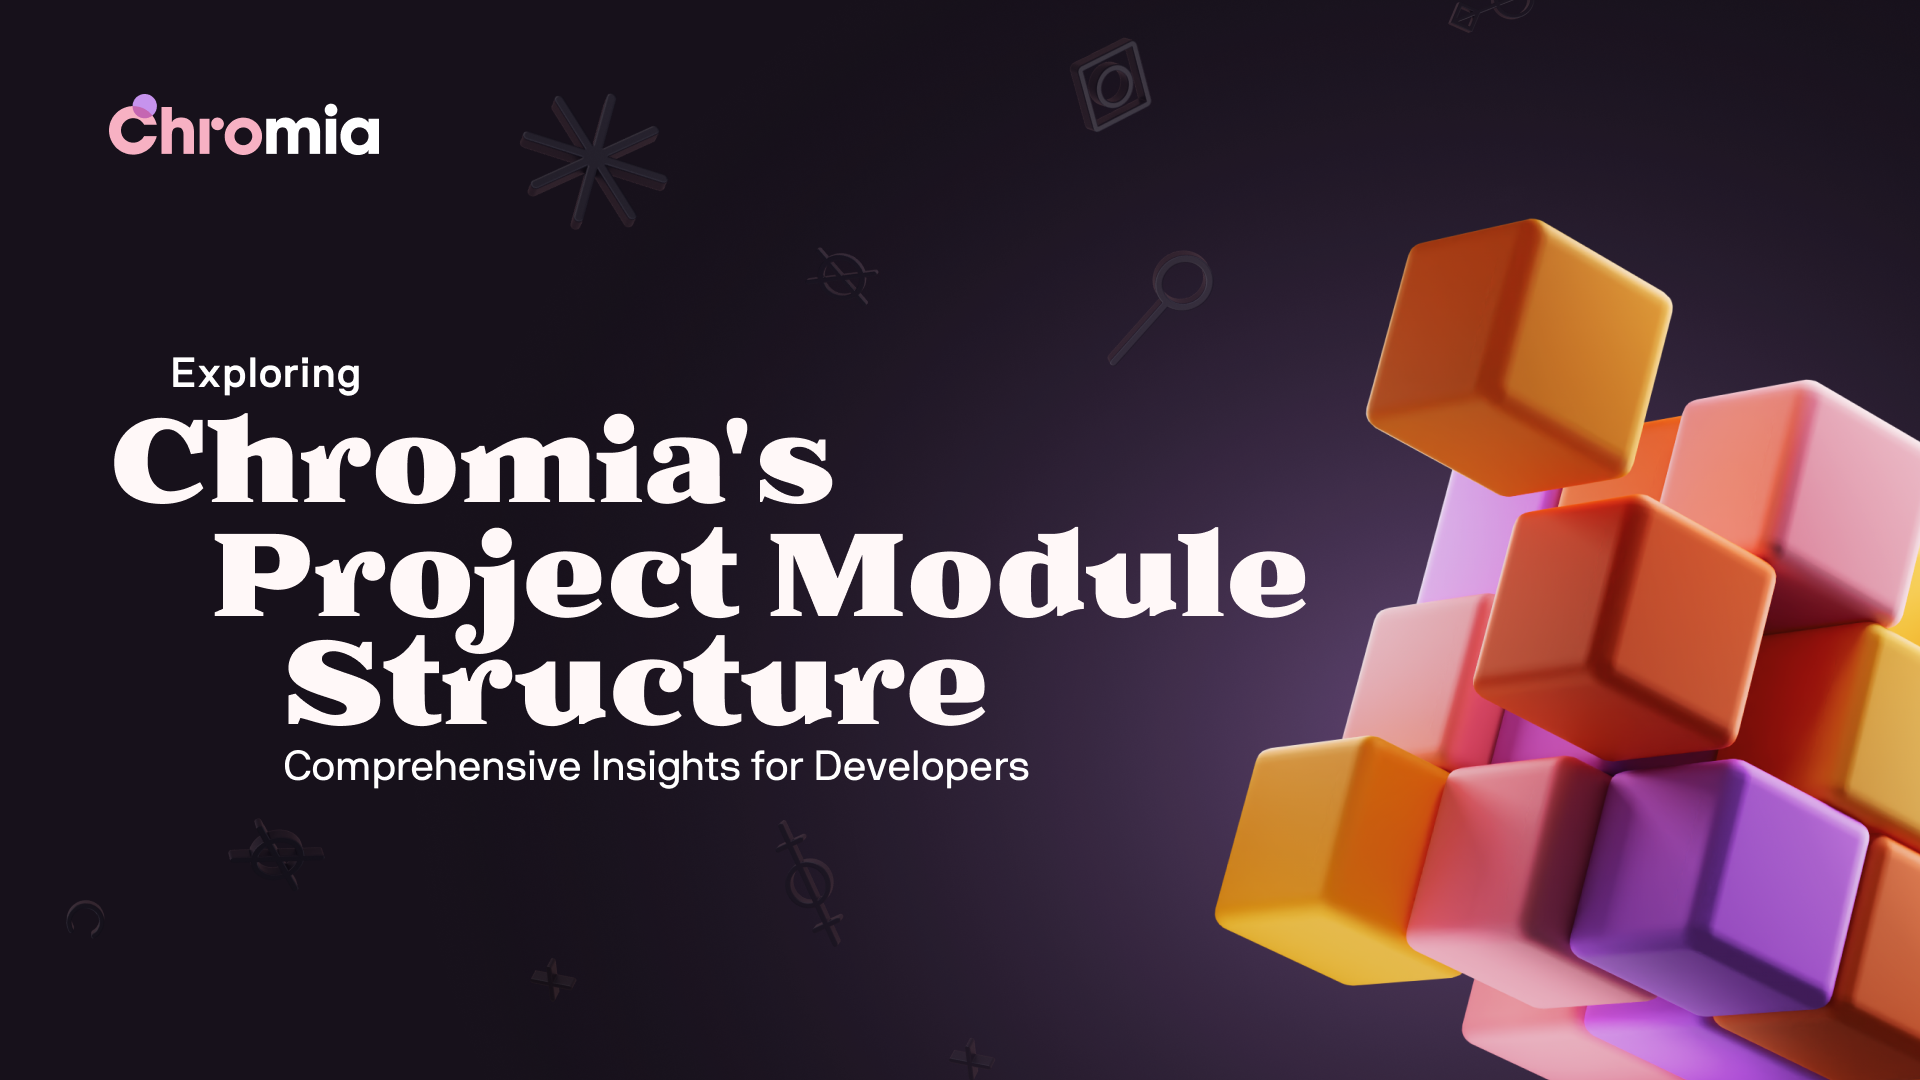 Exploring Chromia's Project Module Structure: Comprehensive Insights for Developers